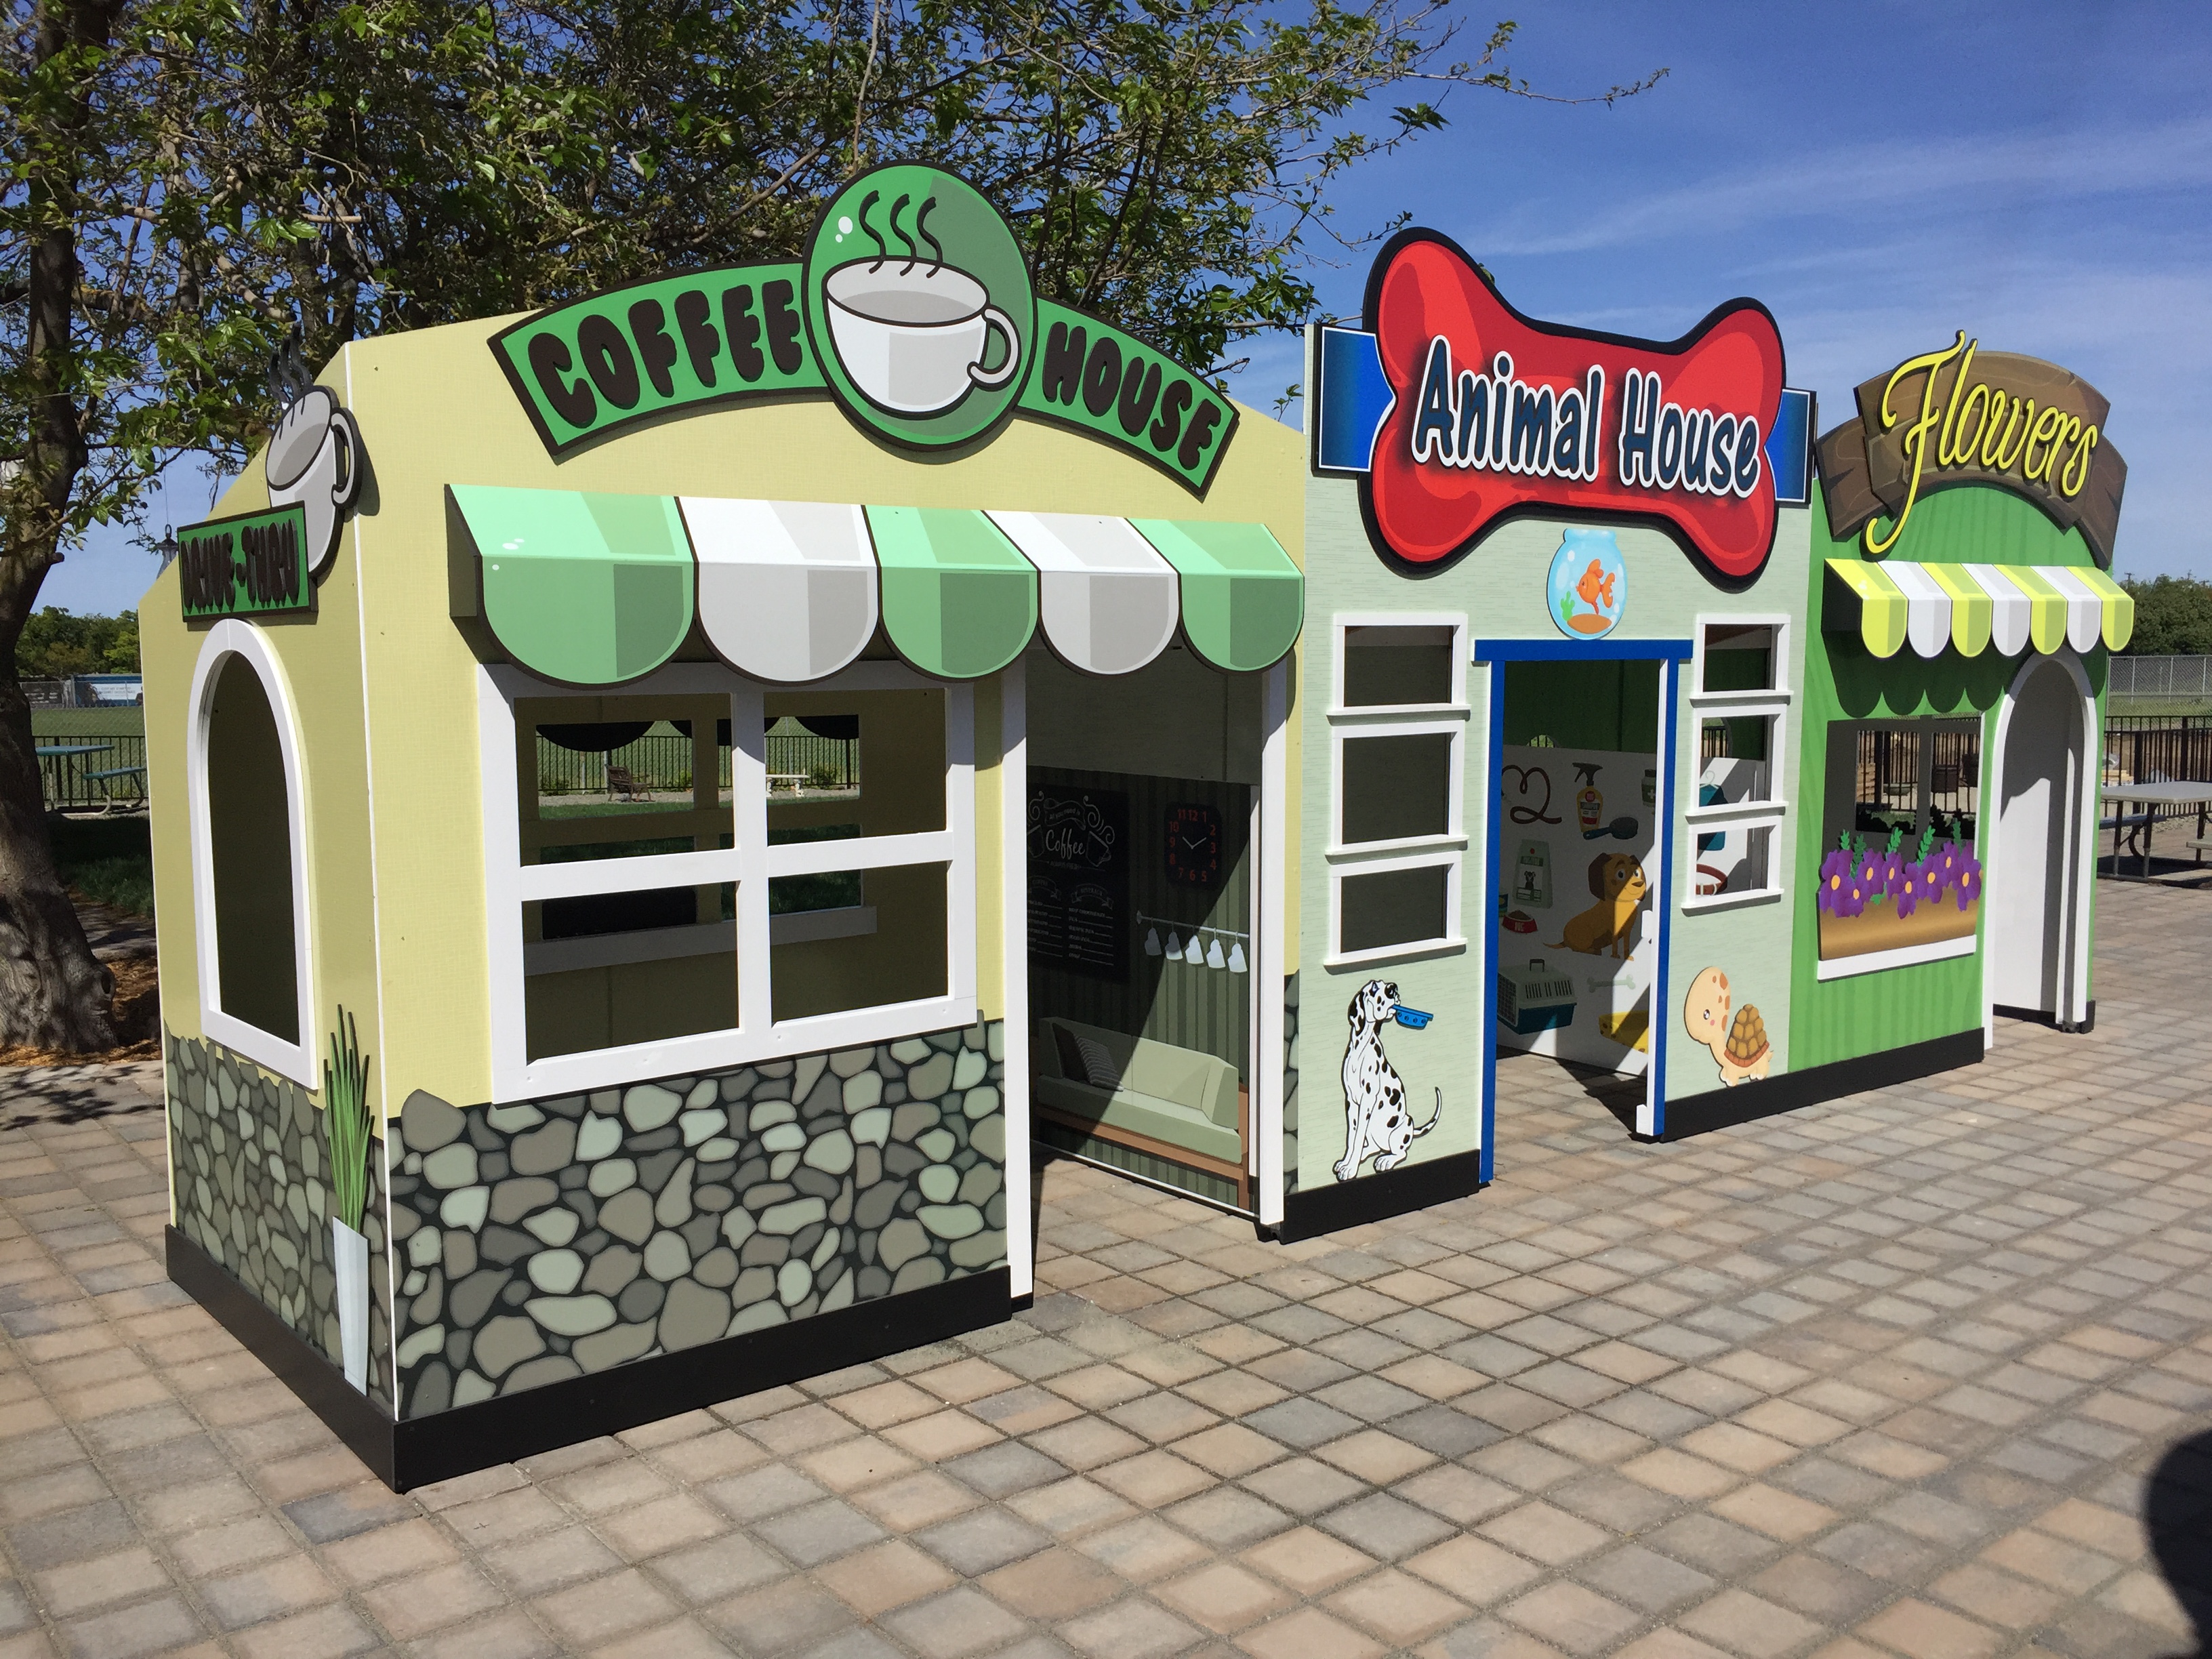 Celebration School Playhouse produced by T Bennett Graphics in Pleasanton, CA